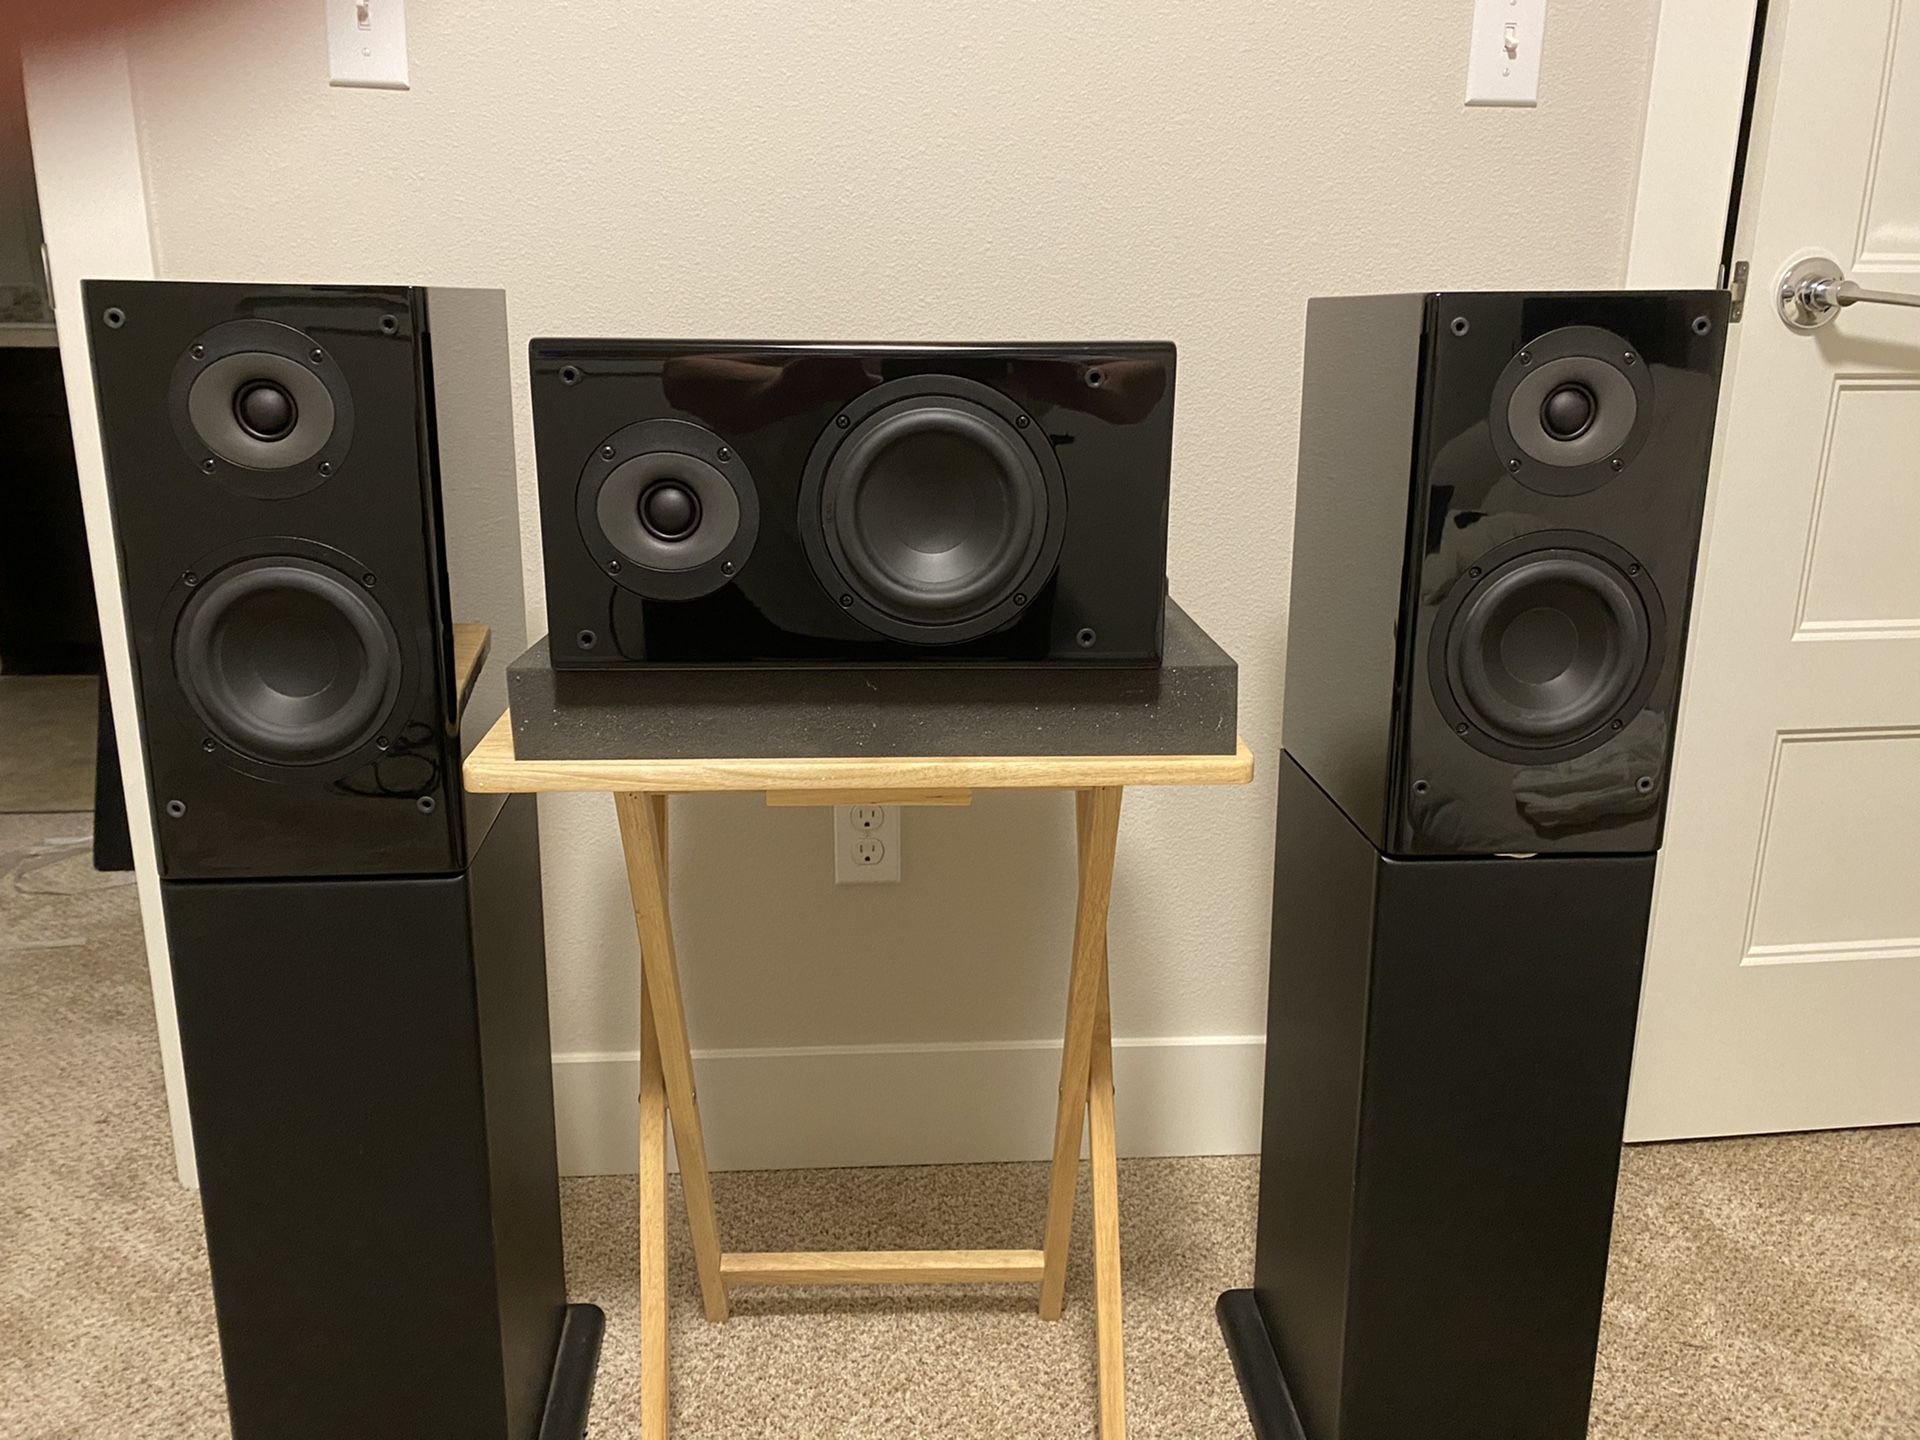 Ascend Acoustics Sierra-1s with CBM-170 Surrounds. If you are looking for the ABSOLUTE BEST sounding speakers for the price, look no further.